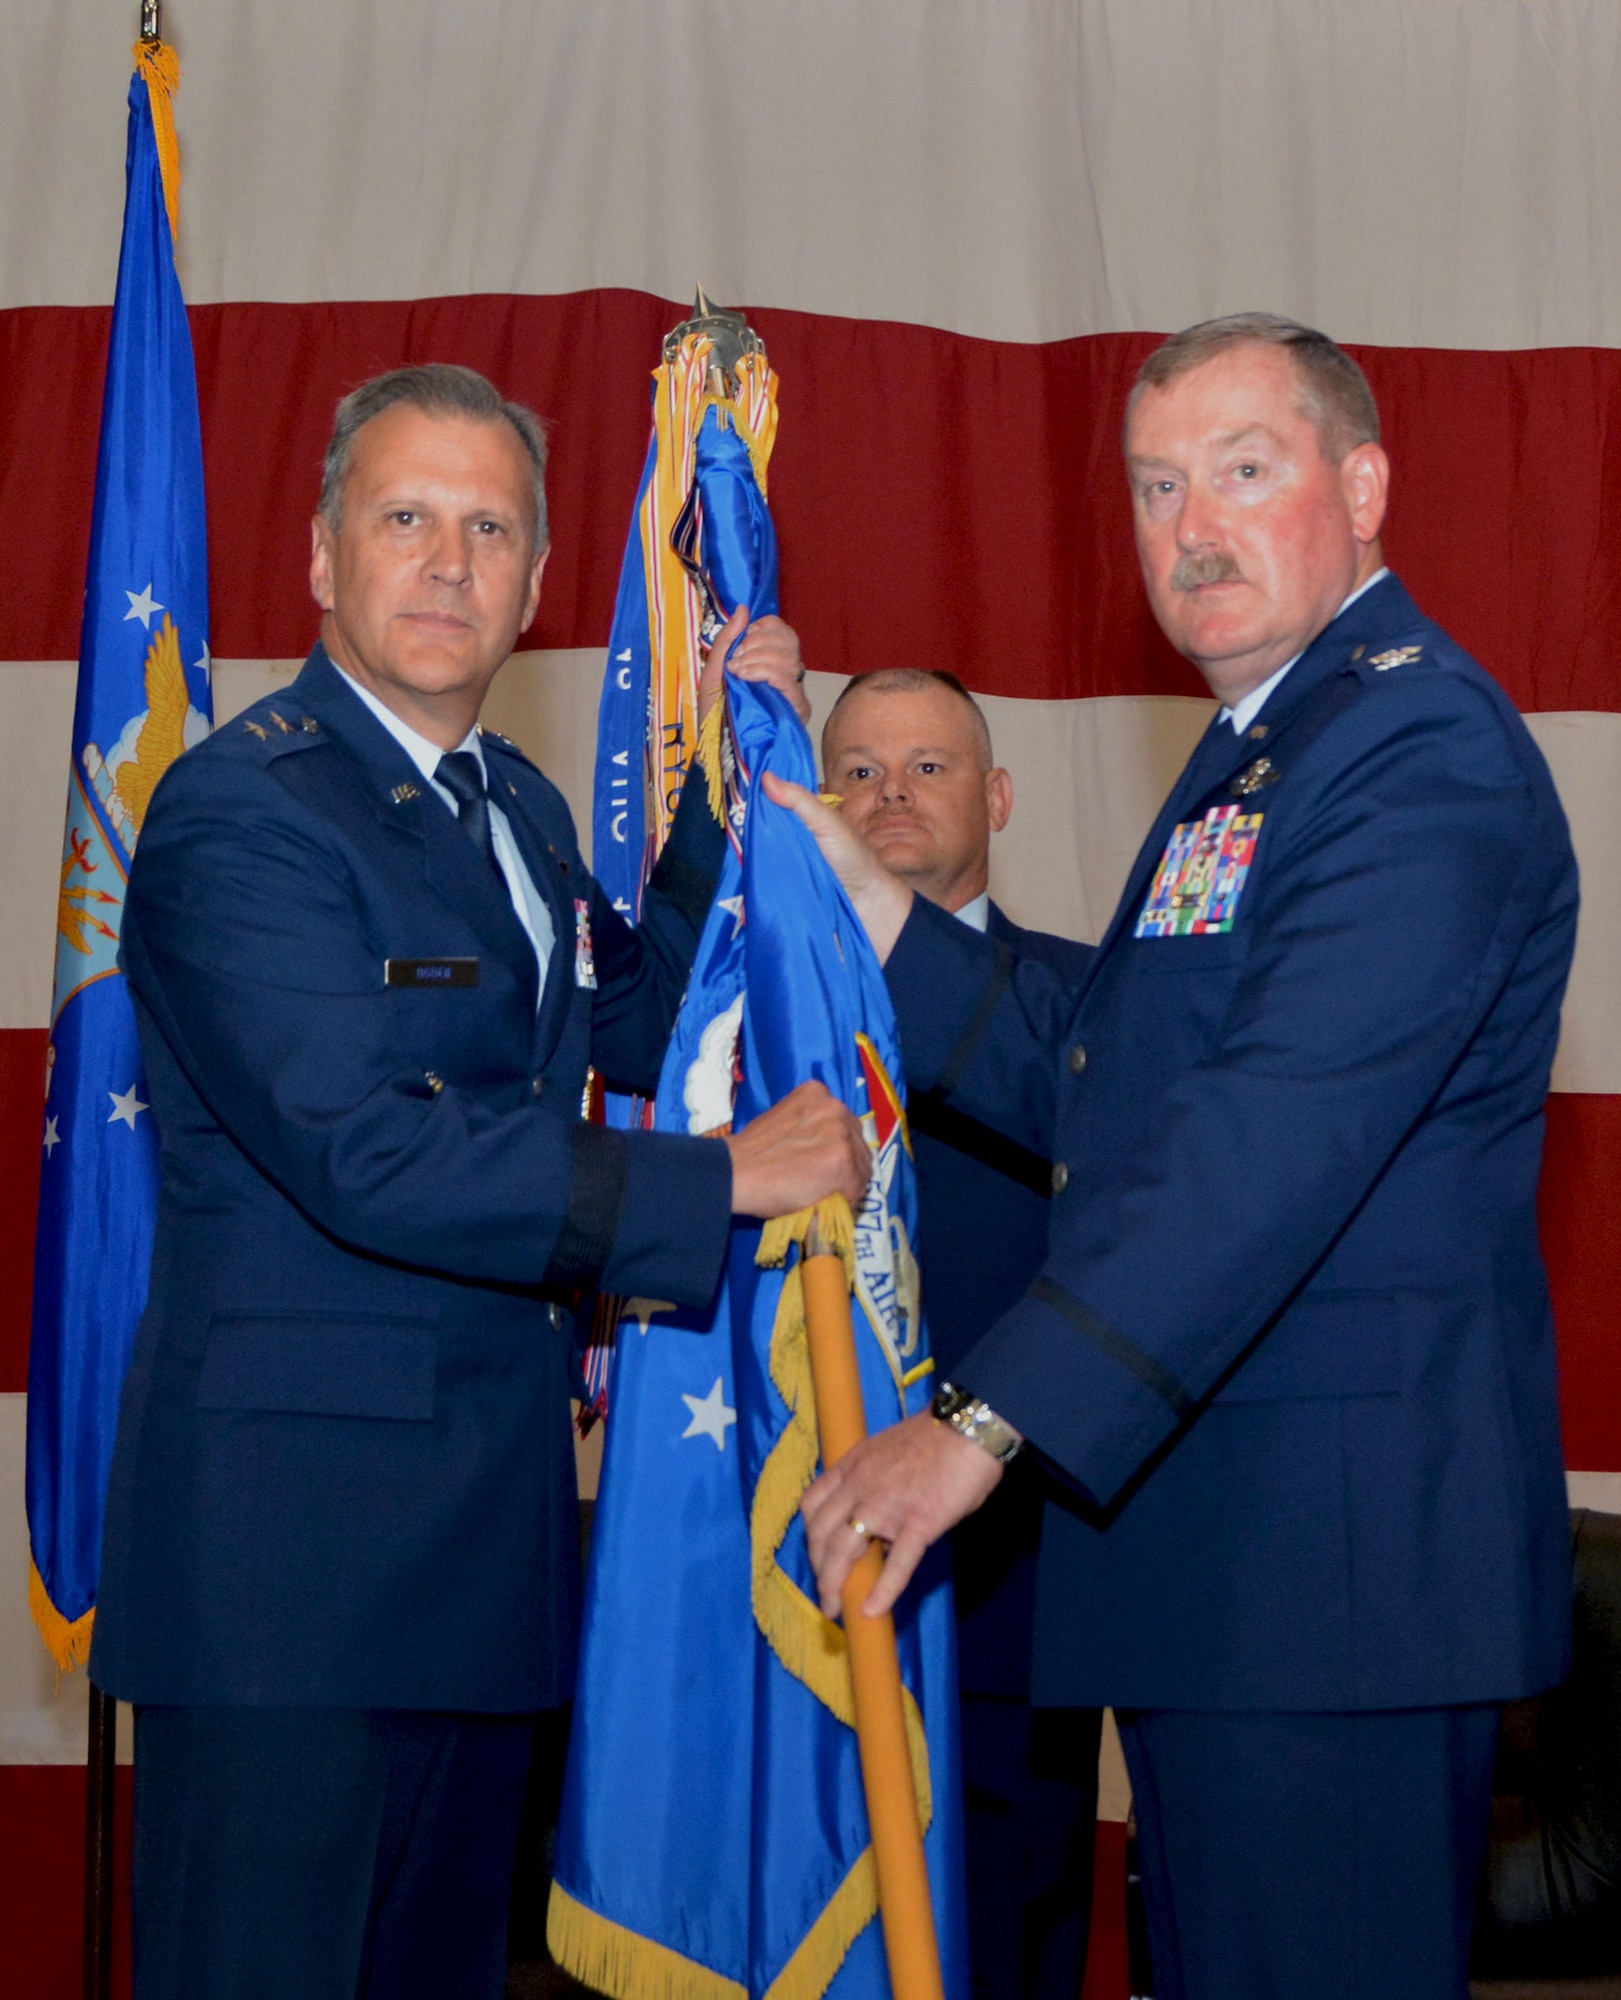 Maj. Gen. Randall Ogden, Fourth Air Force commander, accepts the 507th Air Refueling Wing flag from Col. Douglas Gullion, former 507th ARW commander, during a change of command ceremony June 3, 2018, at Tinker Air Force Base, Okla. Gullion served as commander of the 507th ARW for two years. (U.S. Air Force photo/Tech. Sgt. Samantha Mathison)